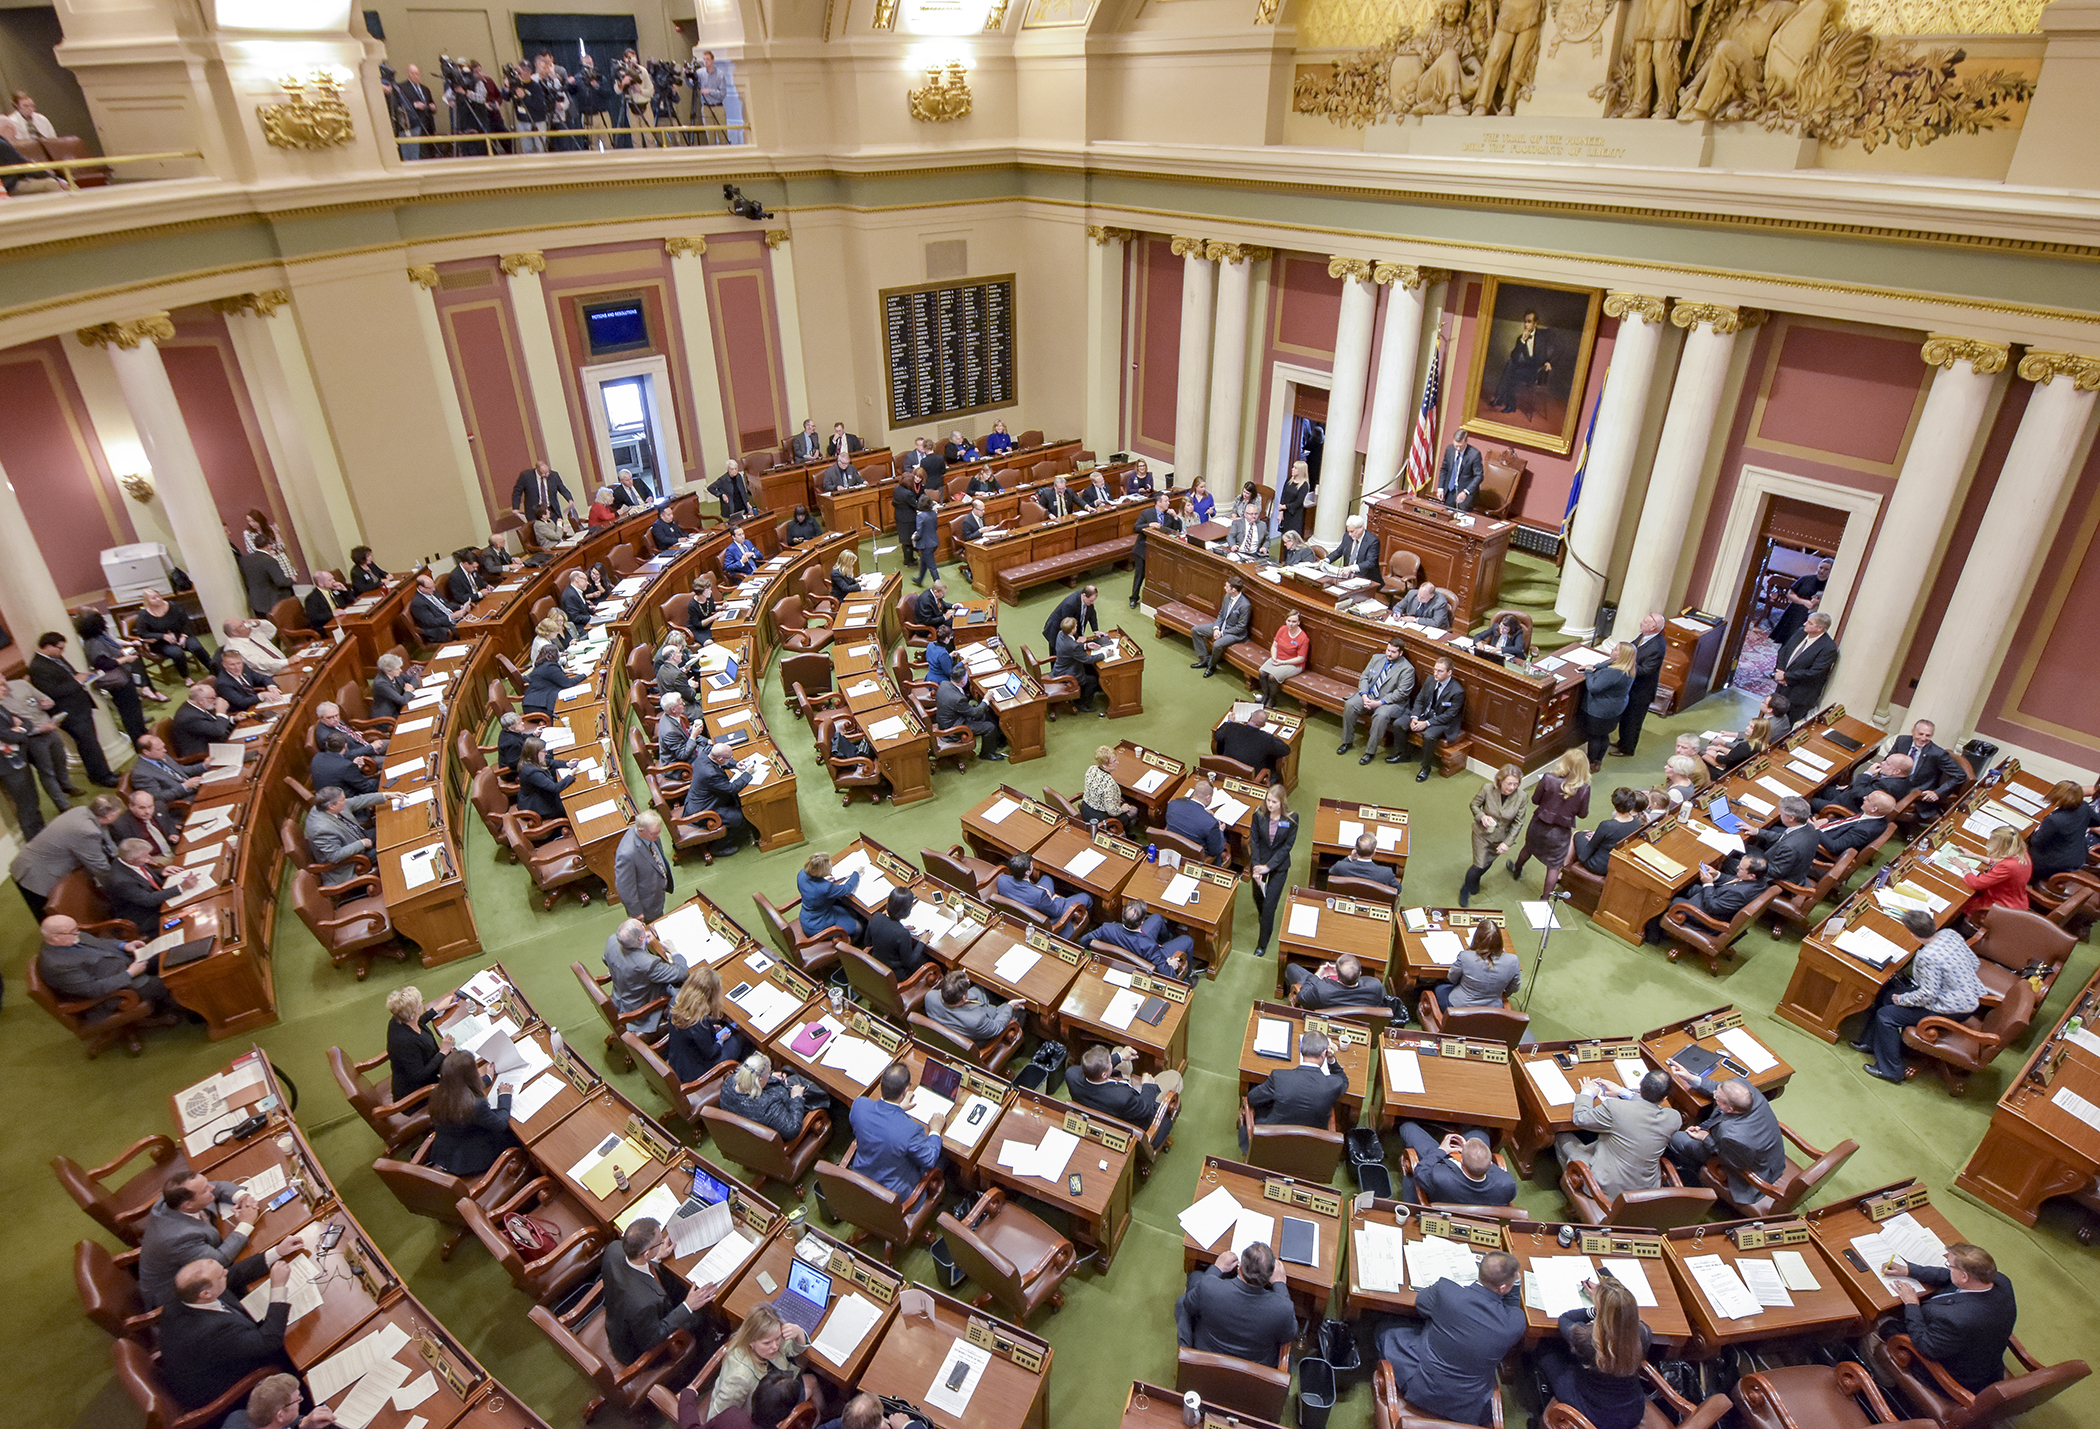 The House Chamber on Feb. 20, the opening day of the 2018 session. Photo by Andrew VonBank